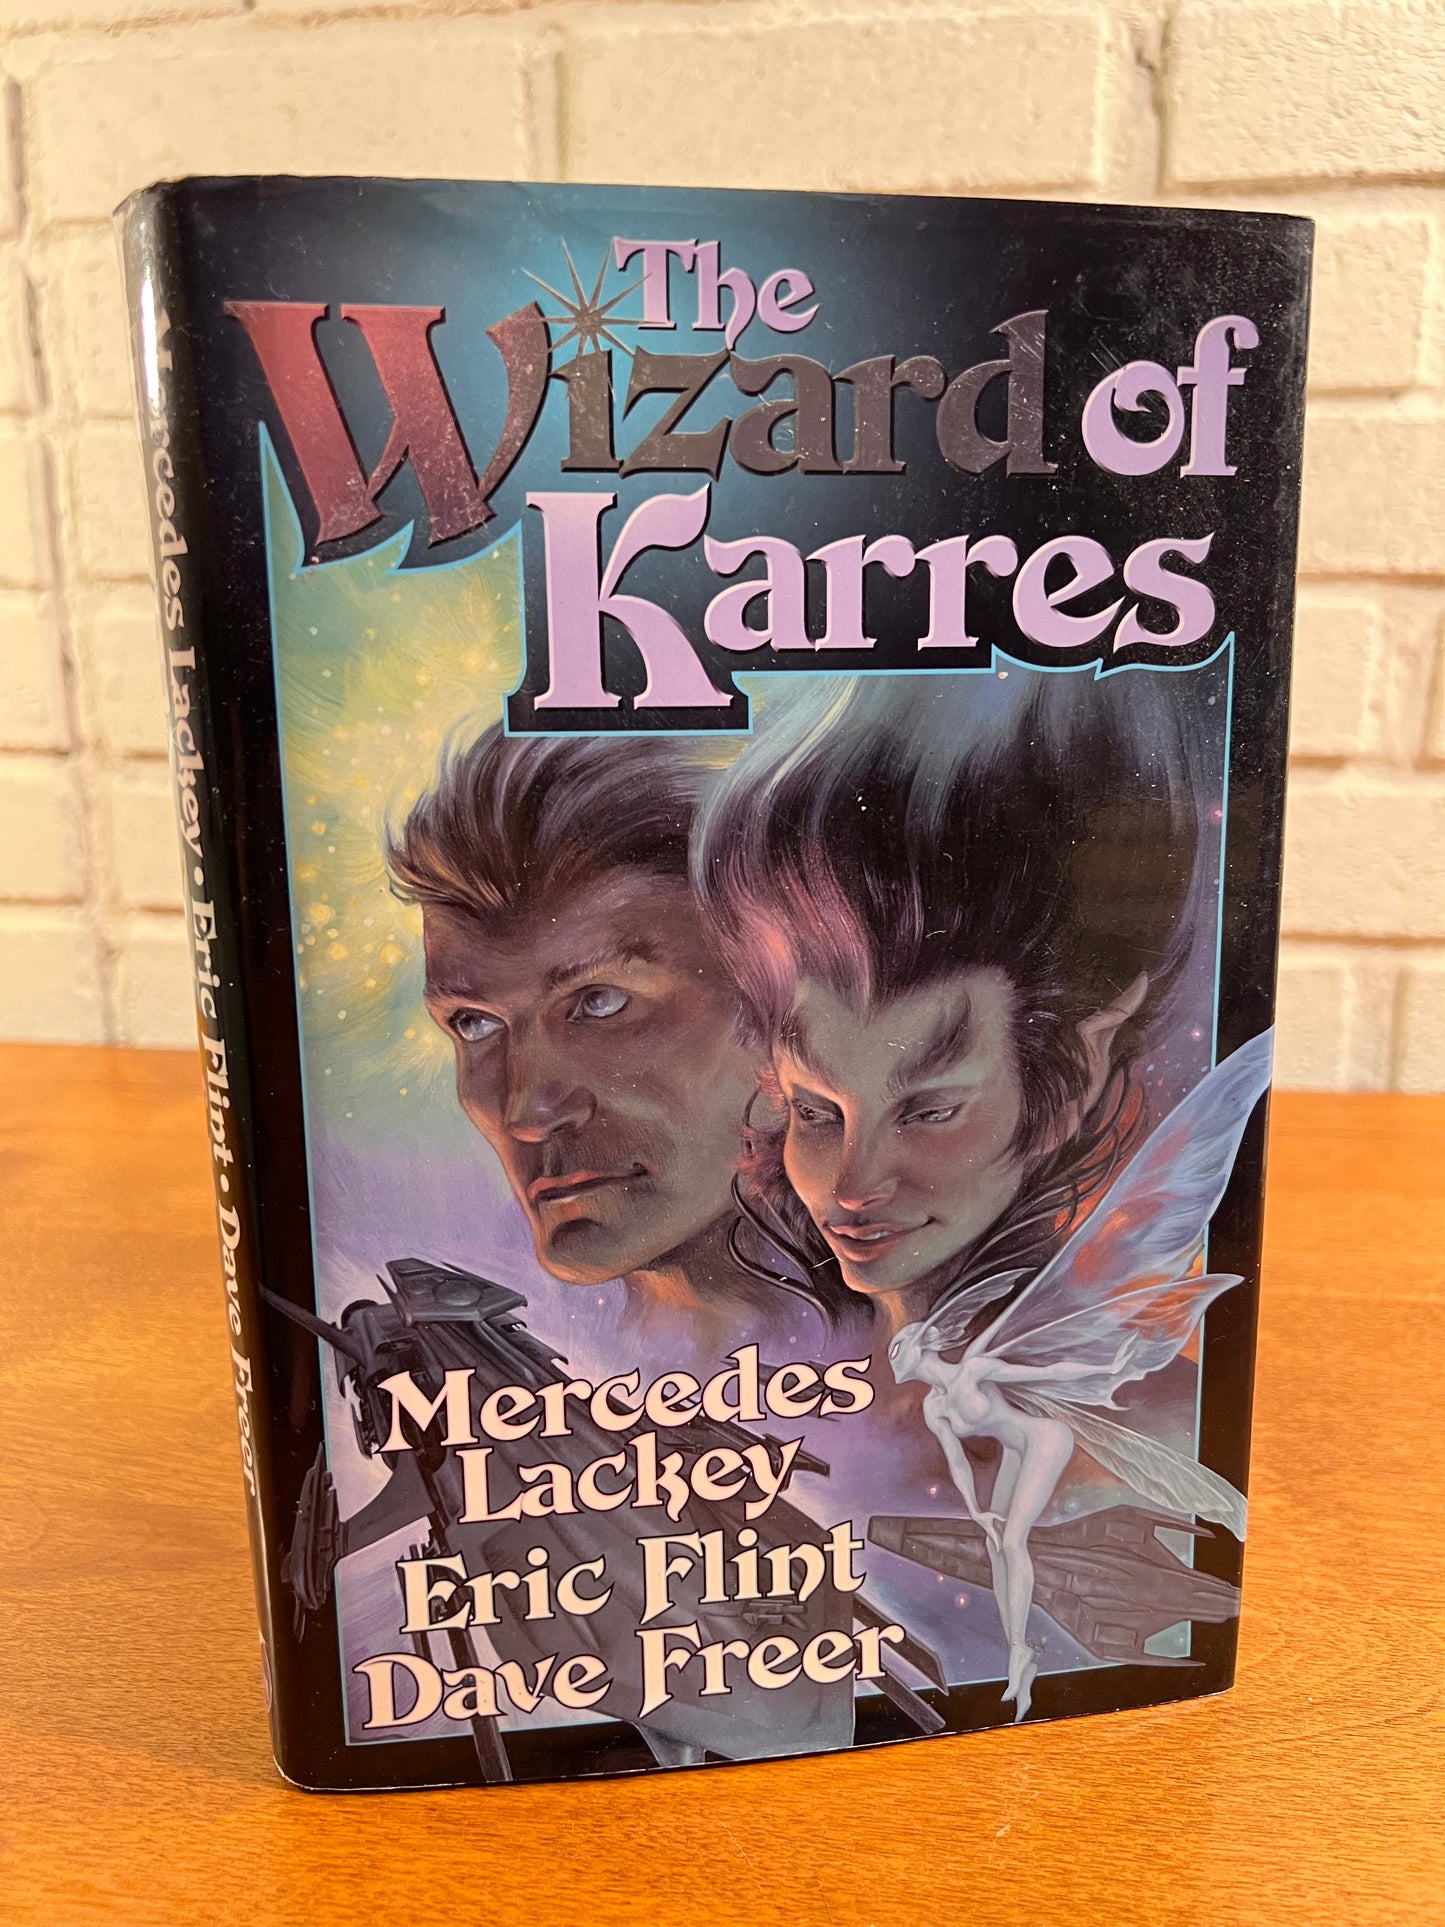 The Wizard of Karres by Mercedes Lackey, Eric Flint and Dave Freer